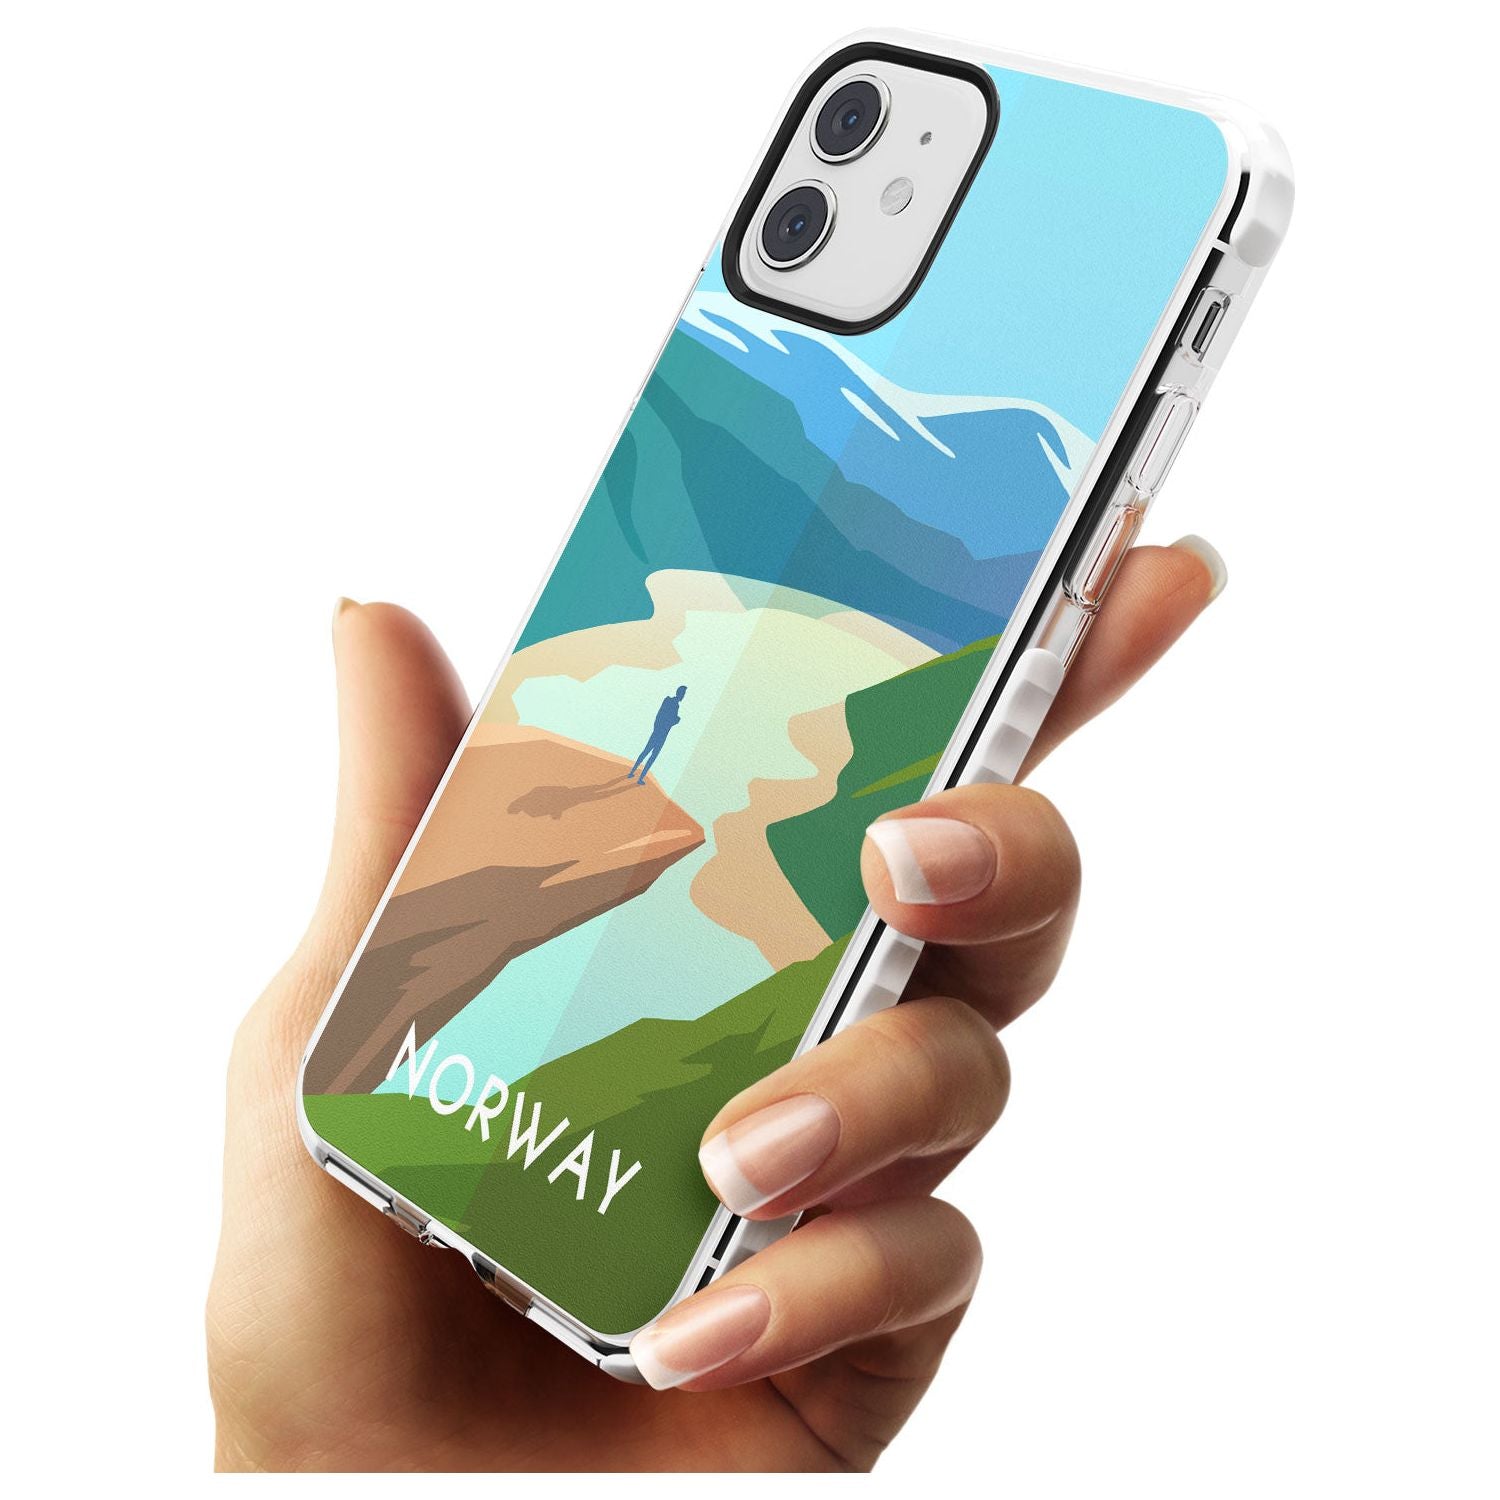 Vintage Travel Poster Norway Impact Phone Case for iPhone 11